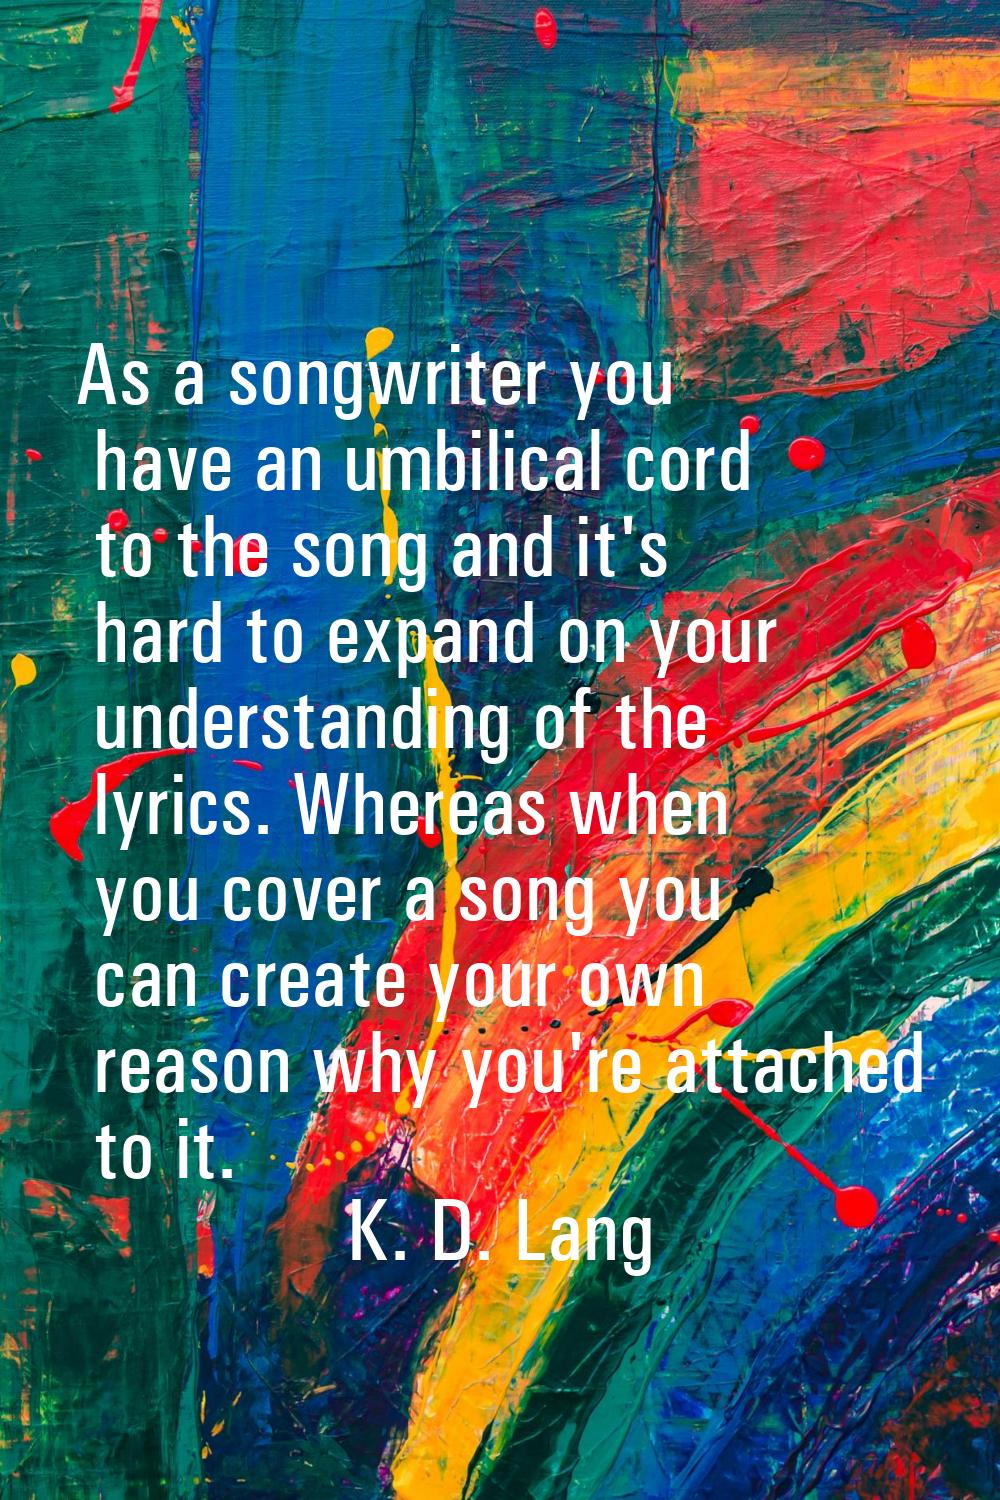 As a songwriter you have an umbilical cord to the song and it's hard to expand on your understandin